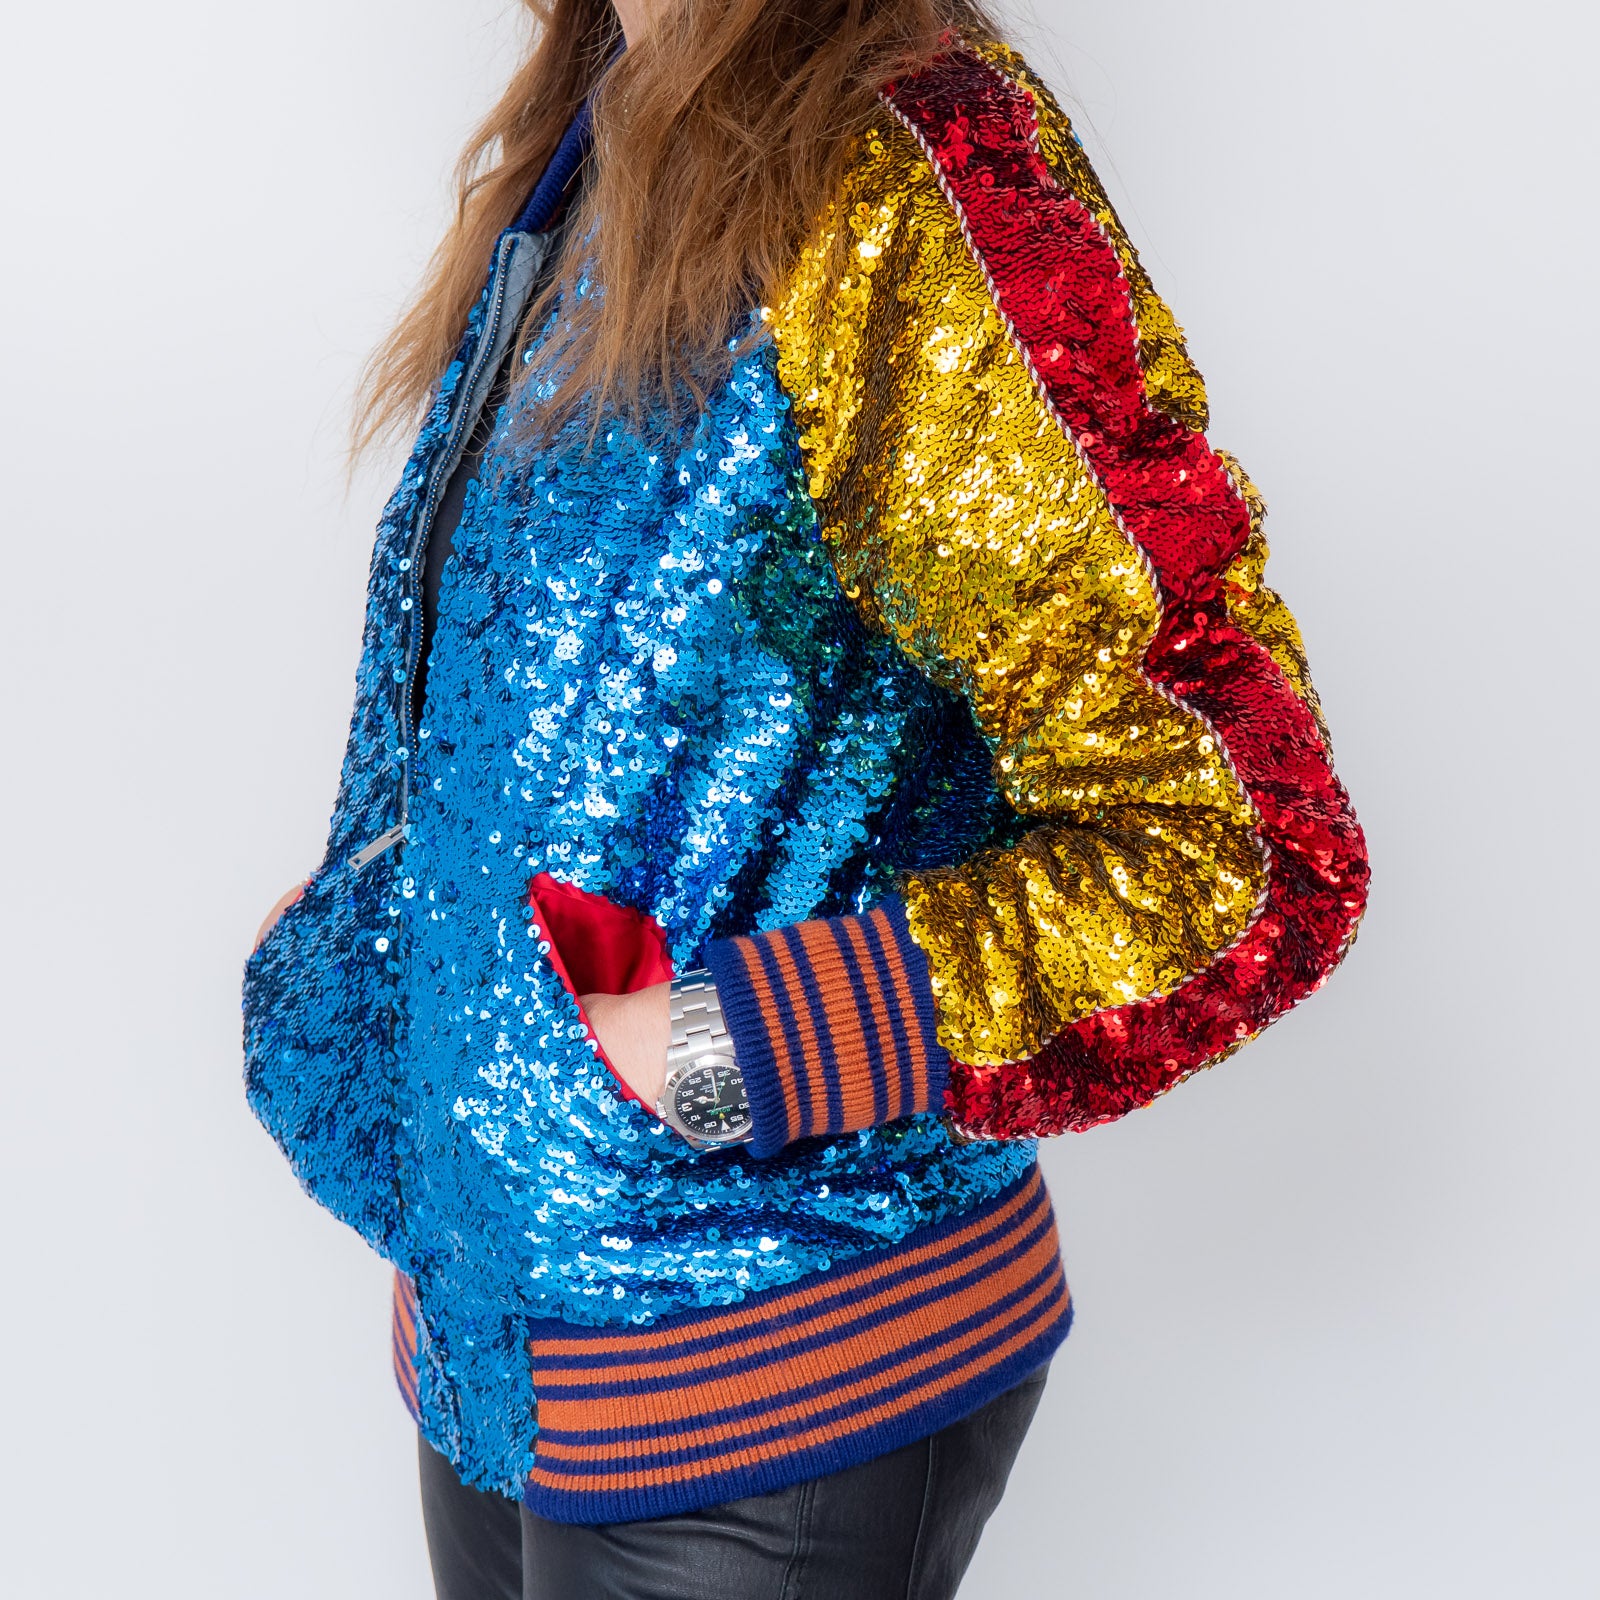 Gucci Loved Multicolour Sequin Jacket Size 12 - Image 2 of 5